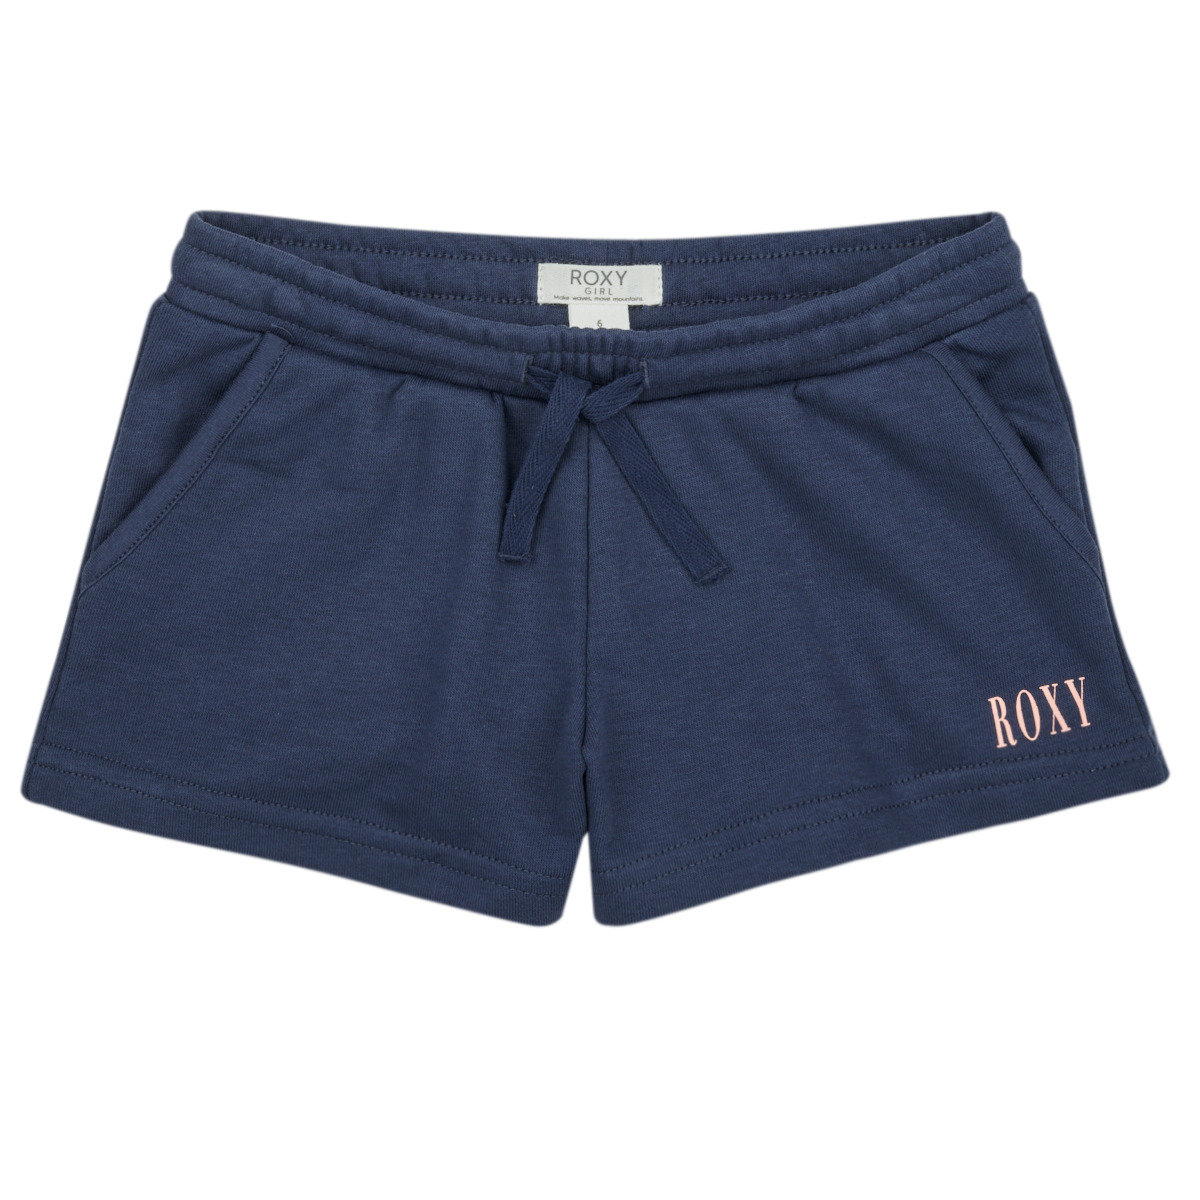 Roxy HAPPINESS Spartoo Child - SHORT Clothing NET Shorts ORIGIN ! delivery / Free - | Marine FOREVER Bermudas